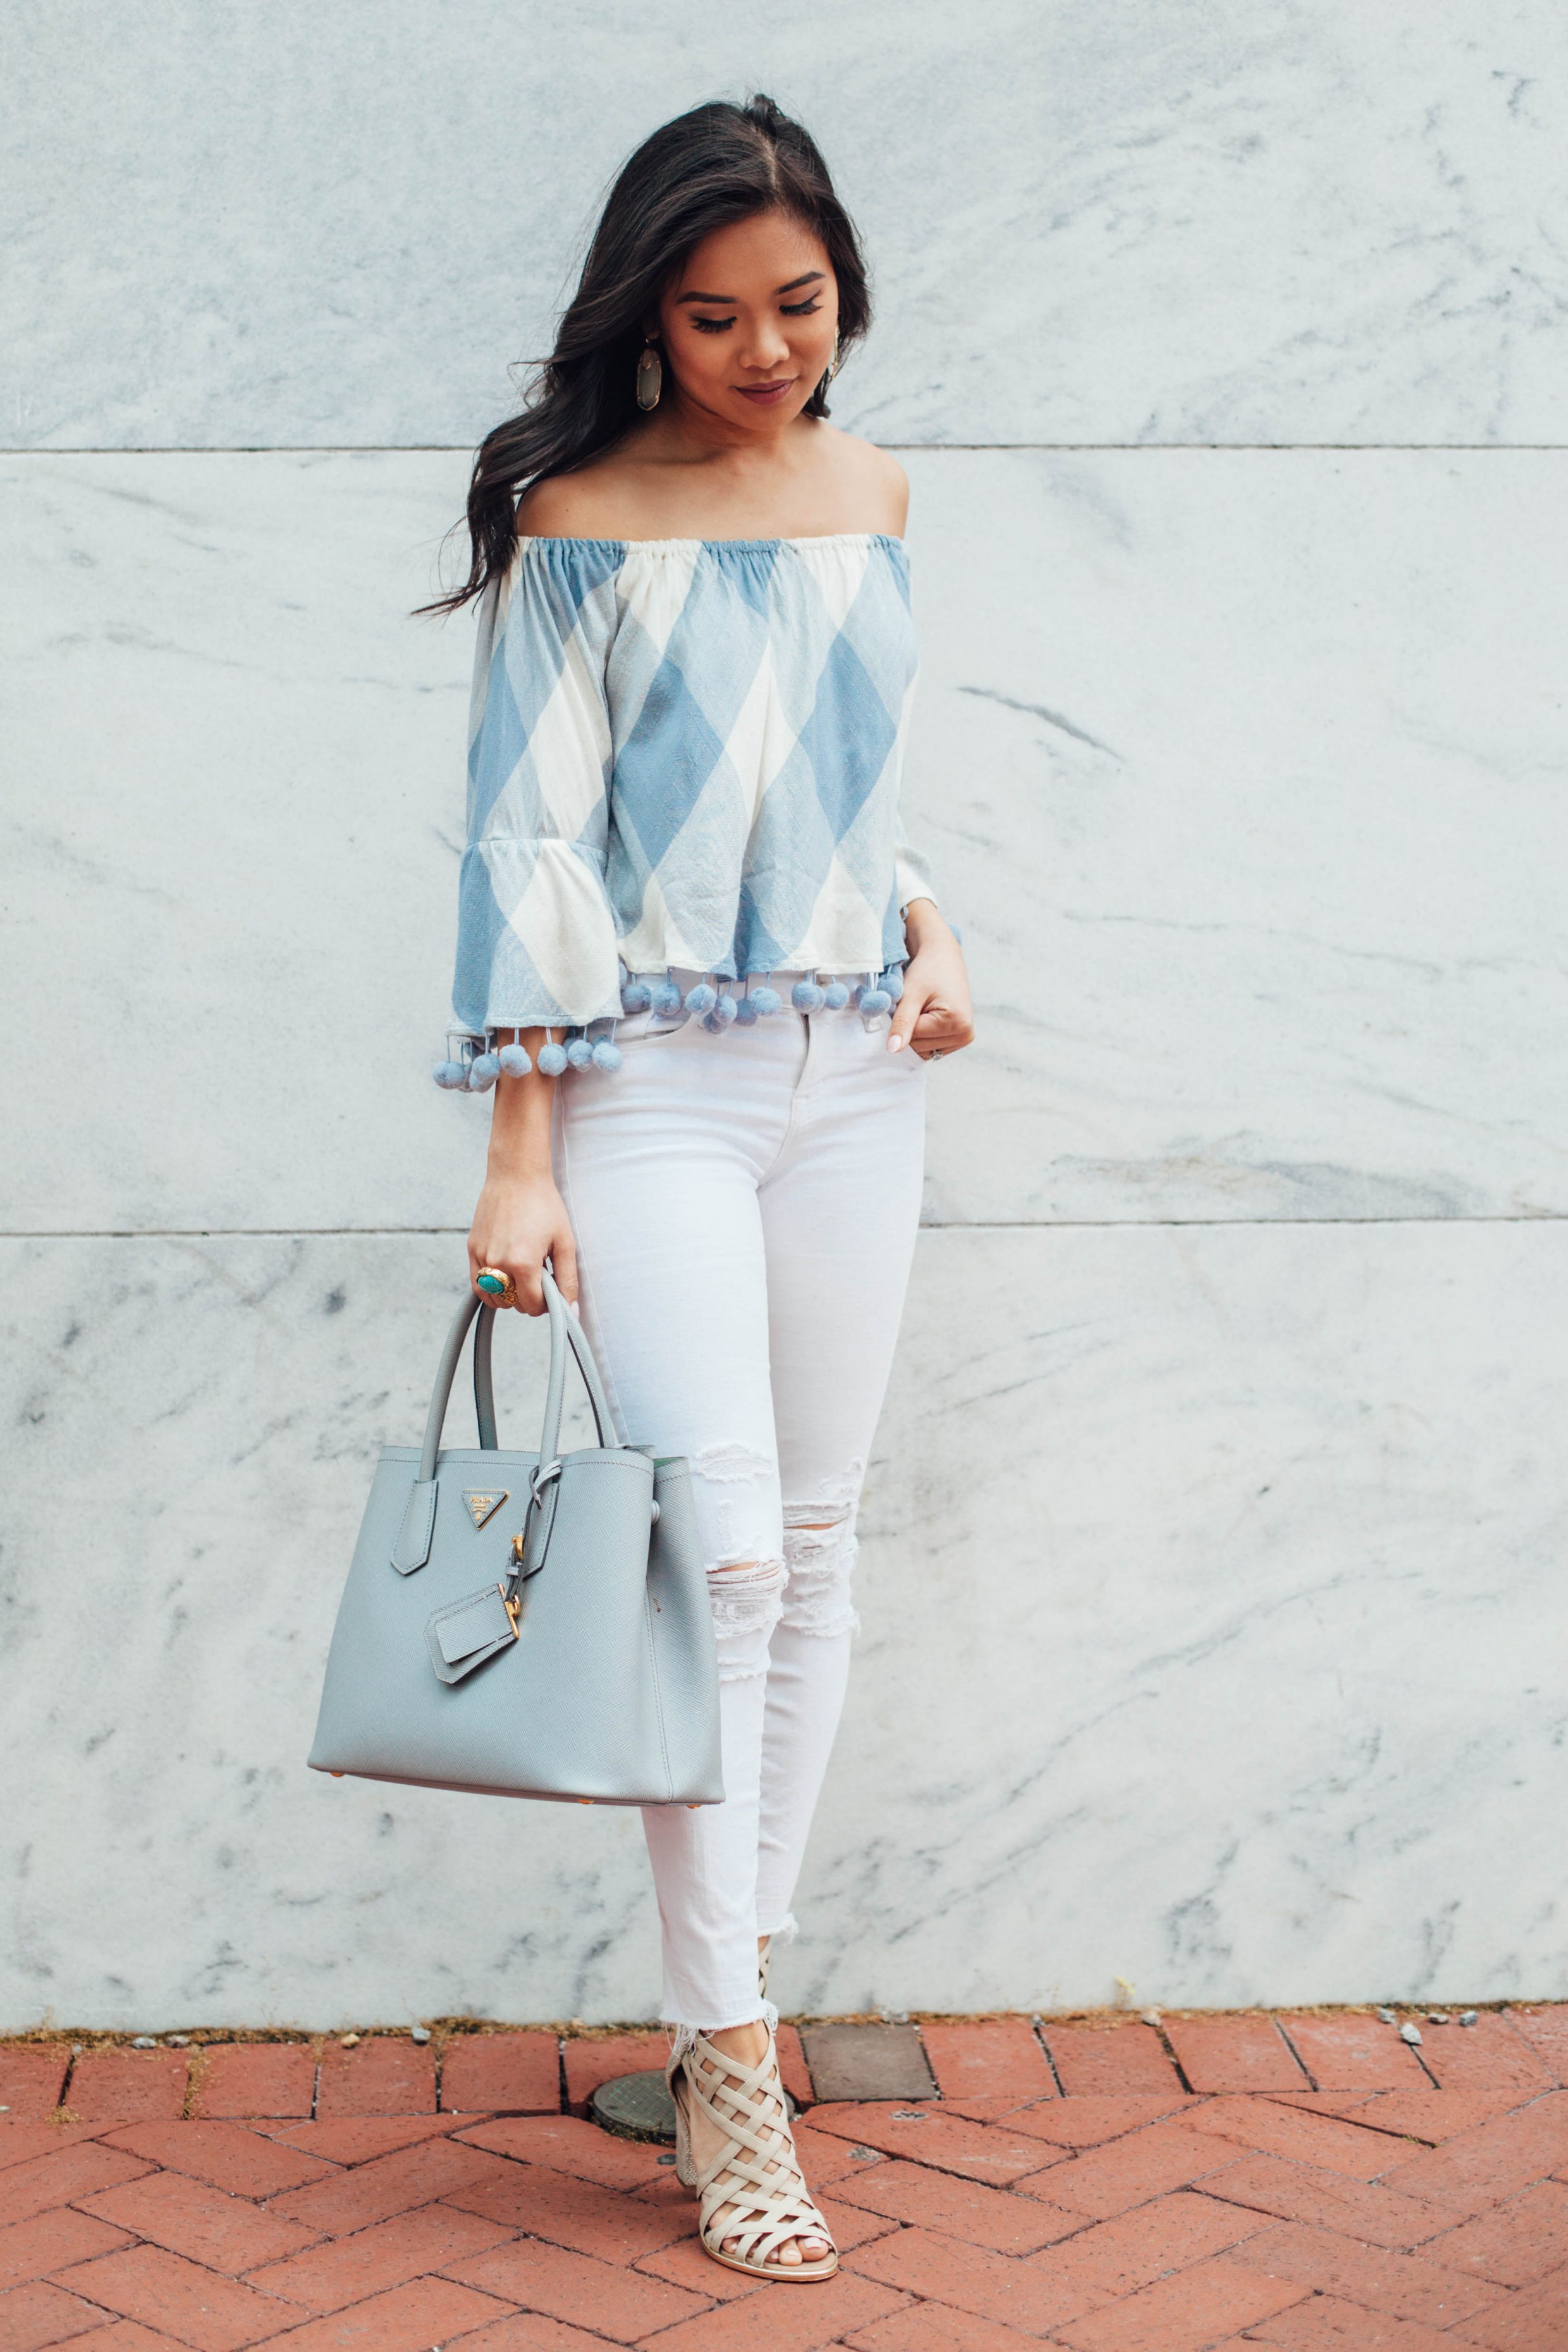 Off the shoulder top with pom pom trim and distressed jeans